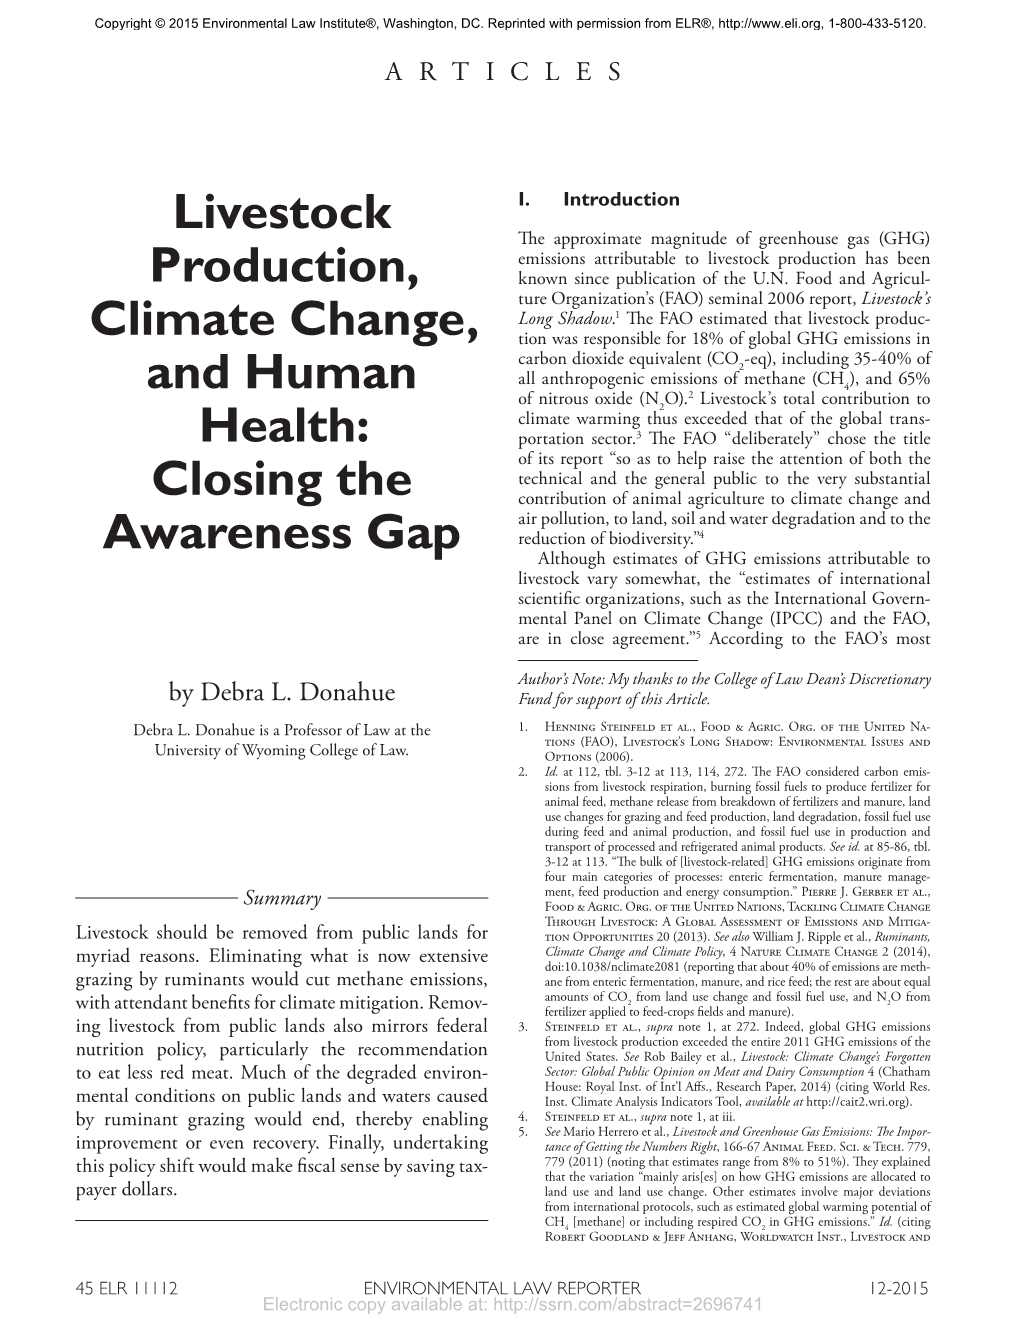 Livestock Production, Climate Change, and Human Health